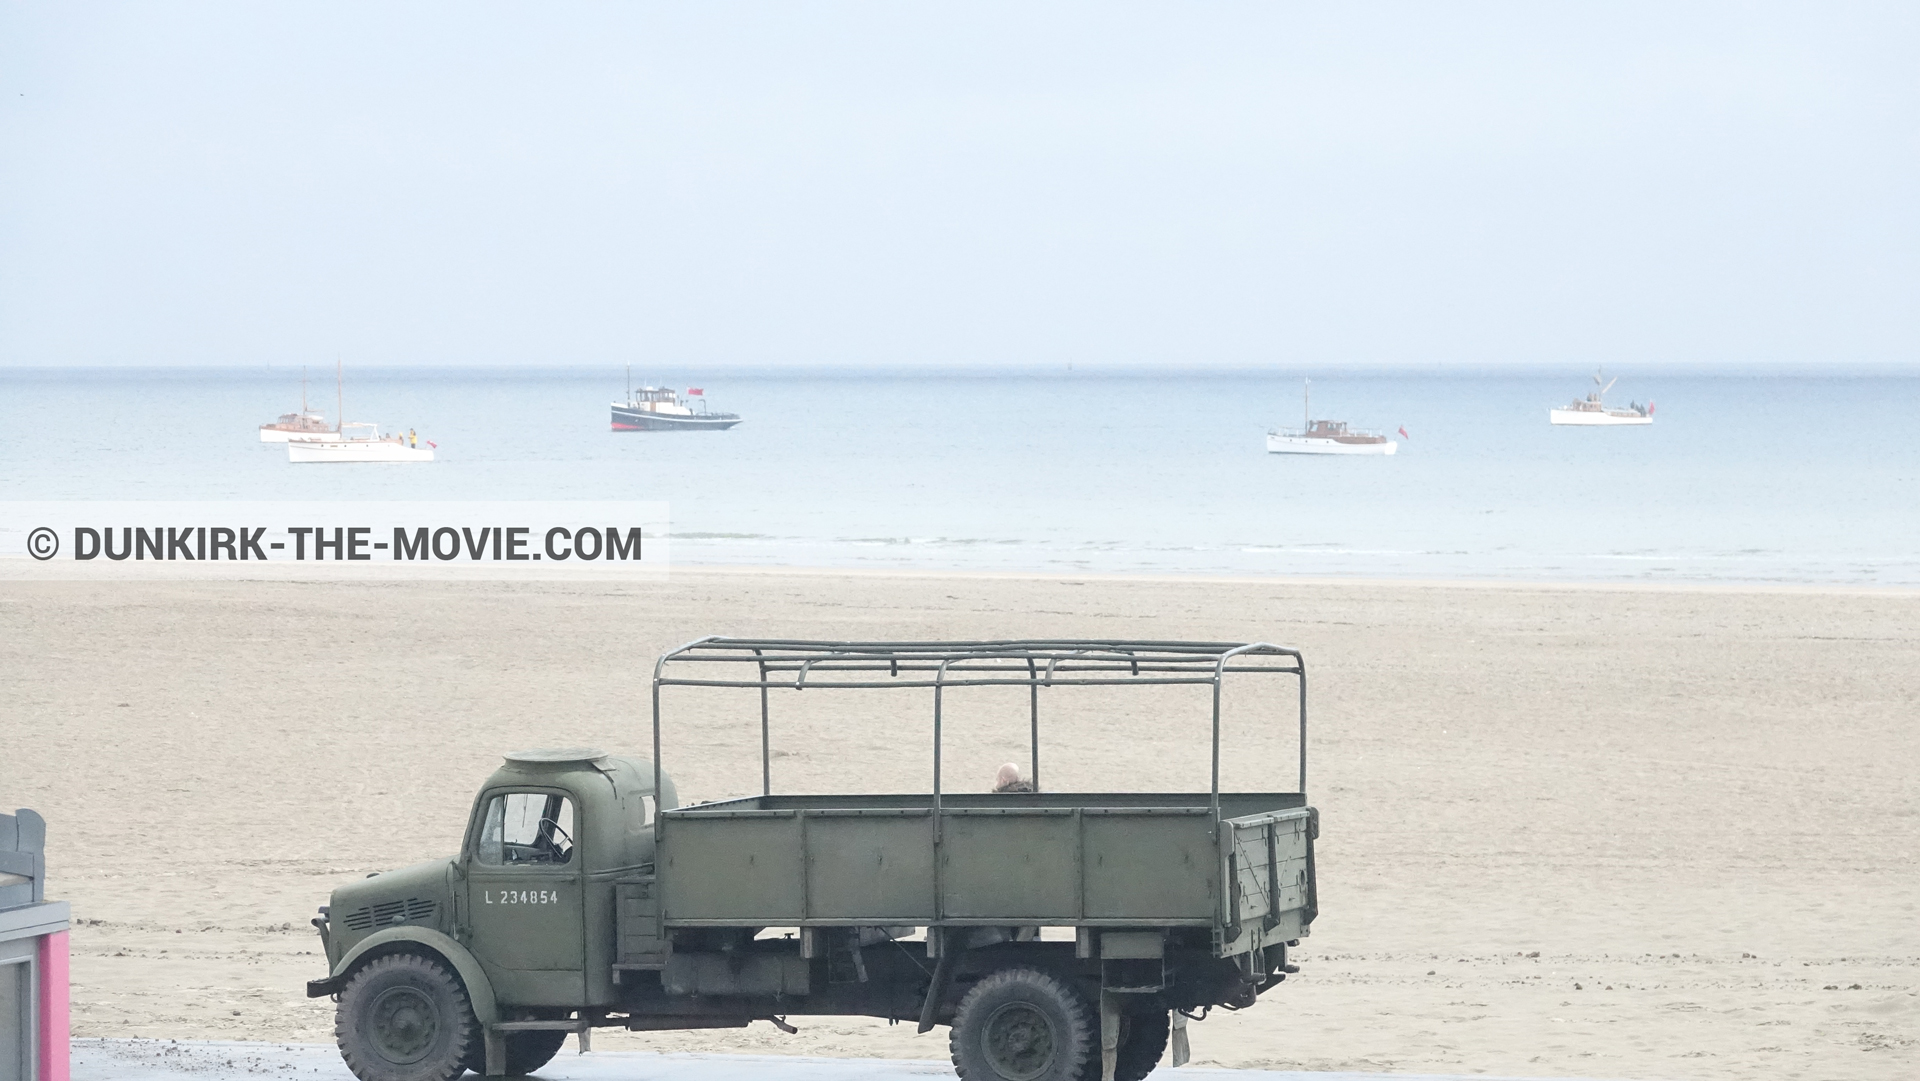 Picture with boat, truck, beach,  from behind the scene of the Dunkirk movie by Nolan